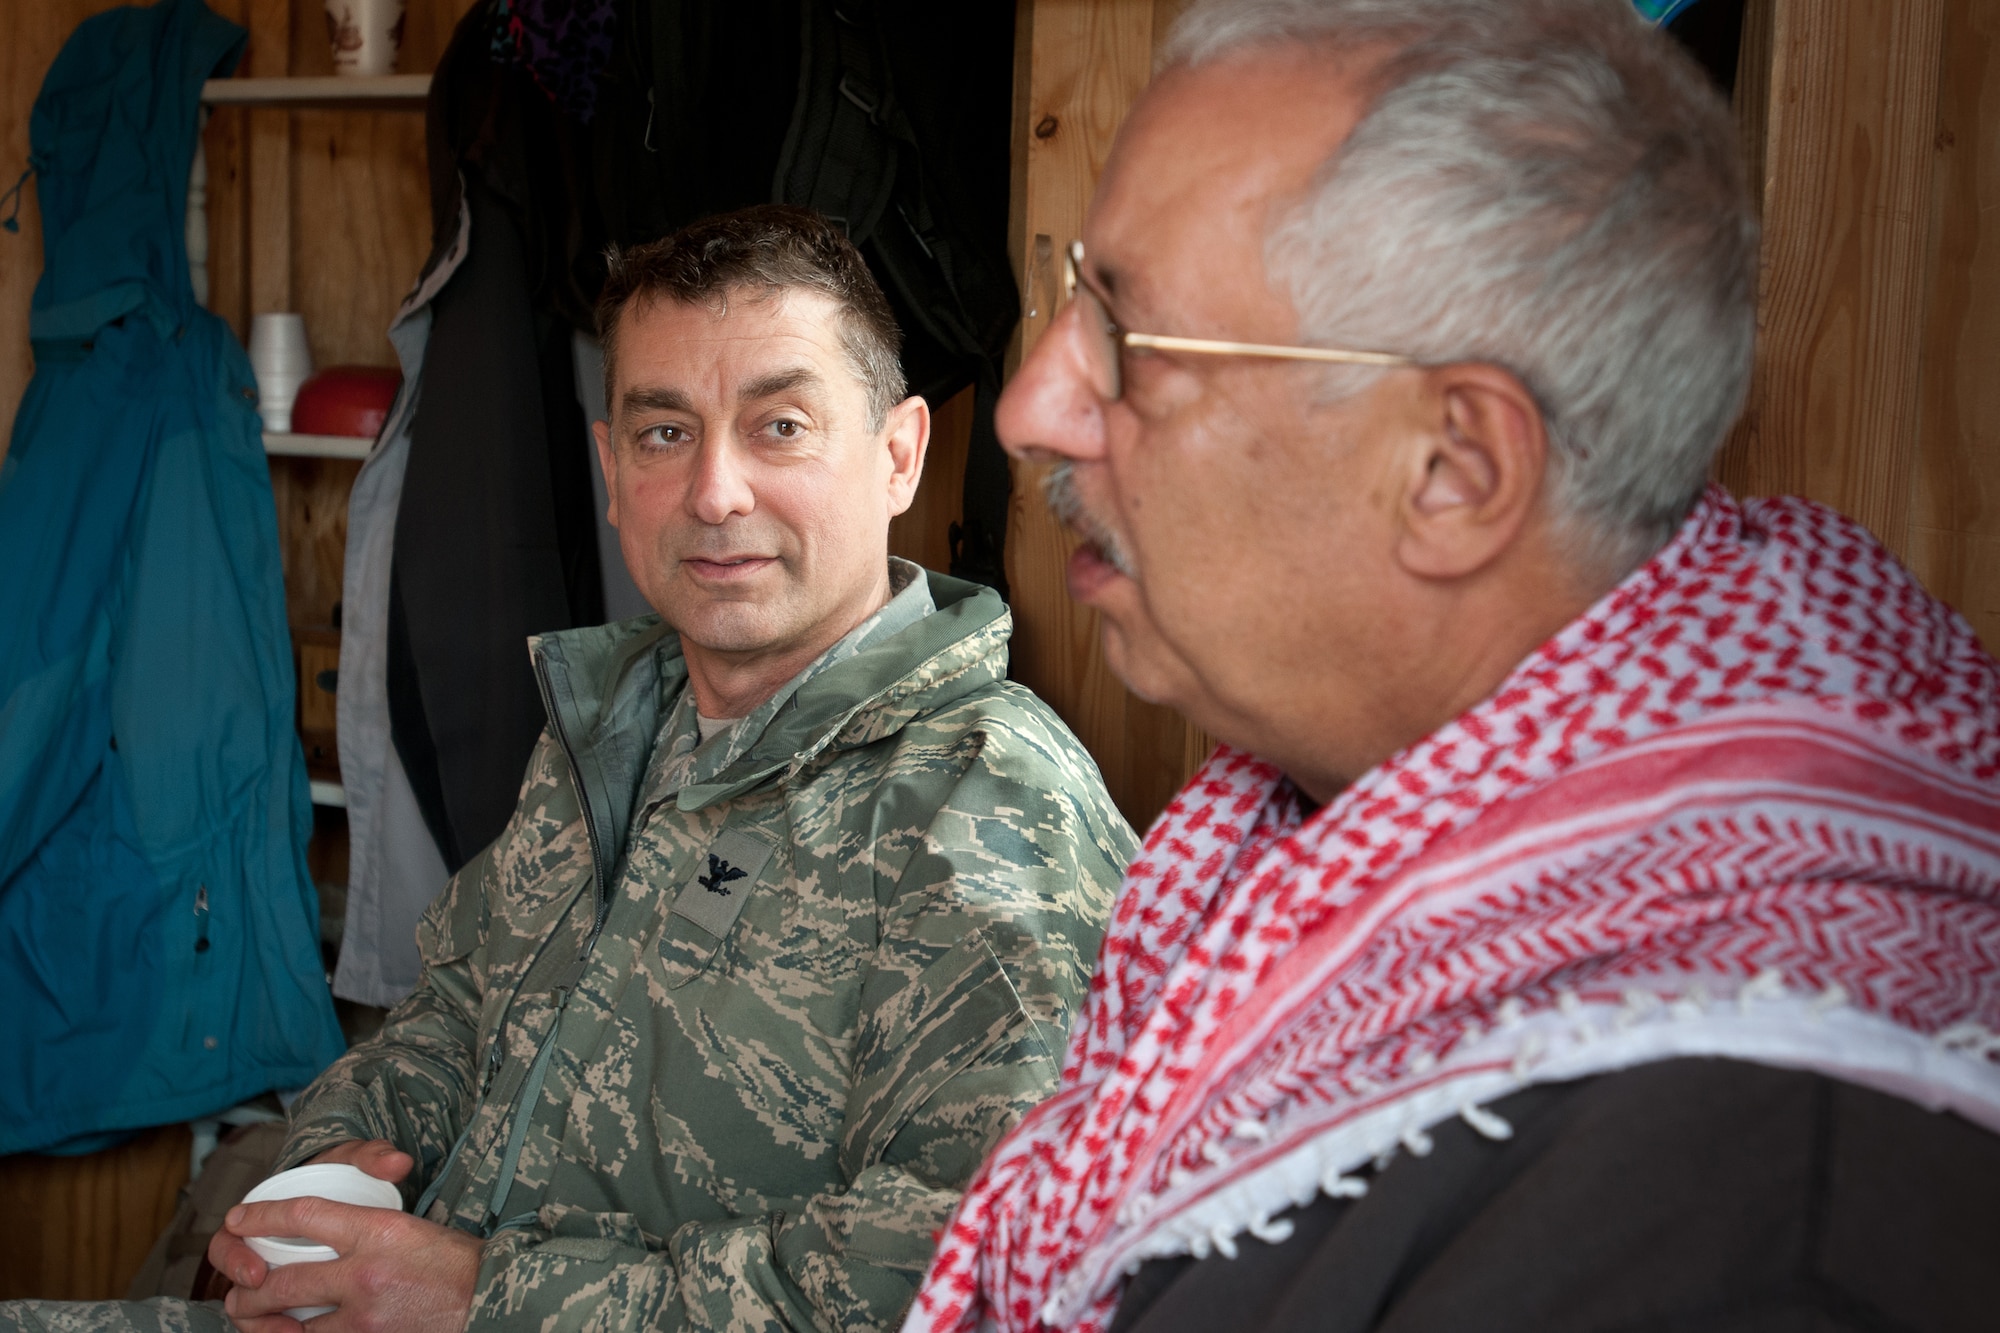 Col. Warren Hurst, commander of the Kentucky Air National Guard's 123rd Contingency Response Group, meets for tea with an actor playing the role of town mayor in the fictional village of Sabor, Nessor, on March 28, 2012. Hurst was participating in Eagle Flag, an exercise designed to simulate a deployed environment at Joint Base McGuire-Dix-Lakehurst, N.J. (U.S. Air Force photo by Maj. Dale Greer)